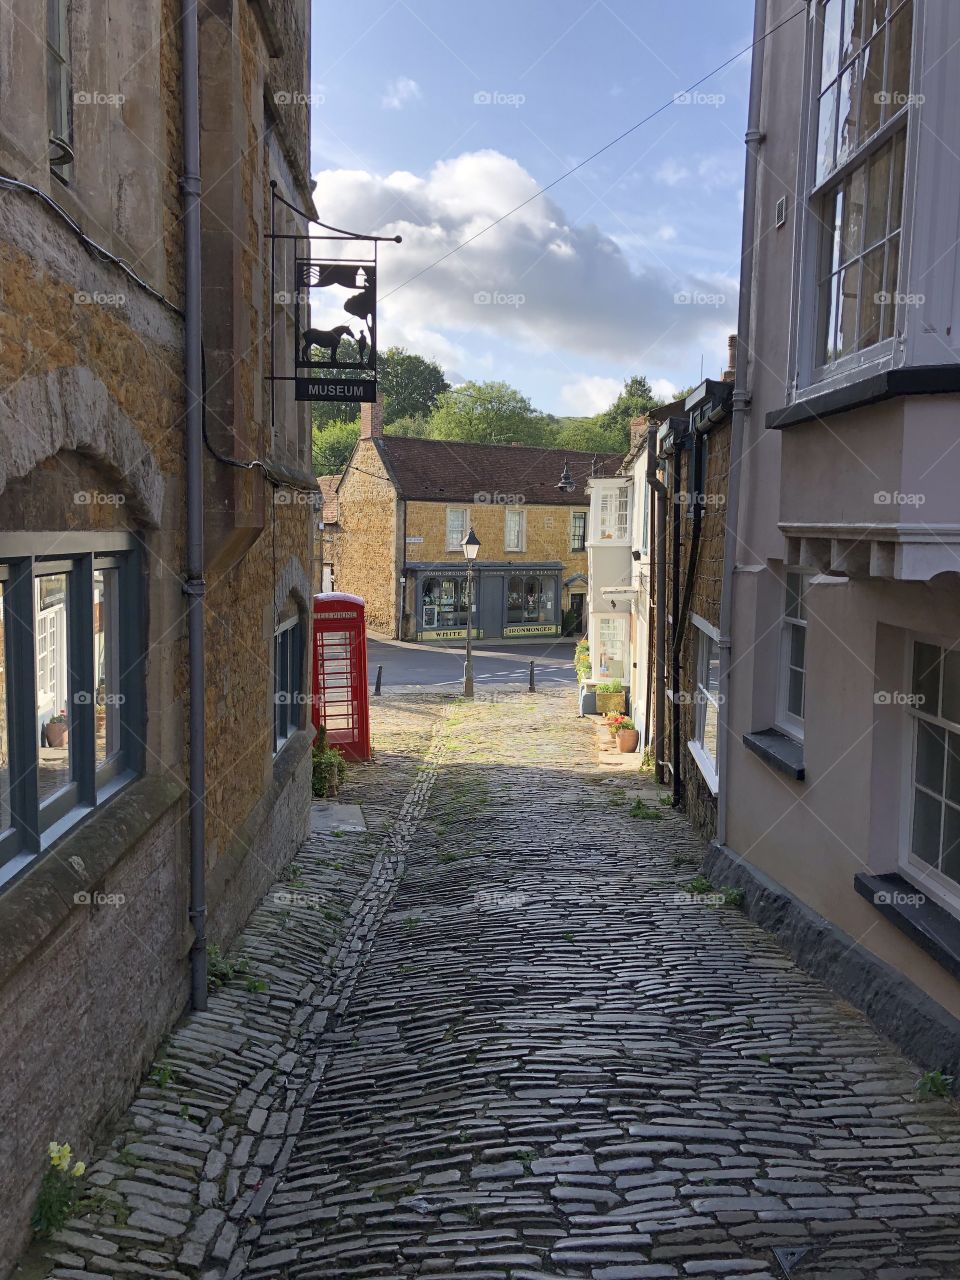 This delightful little pathway to the central point of Castle Cary is a reminder of the picturesque importance of this village. The red telephone box perhaps a reminder of days past and will earn its place in history in the future.